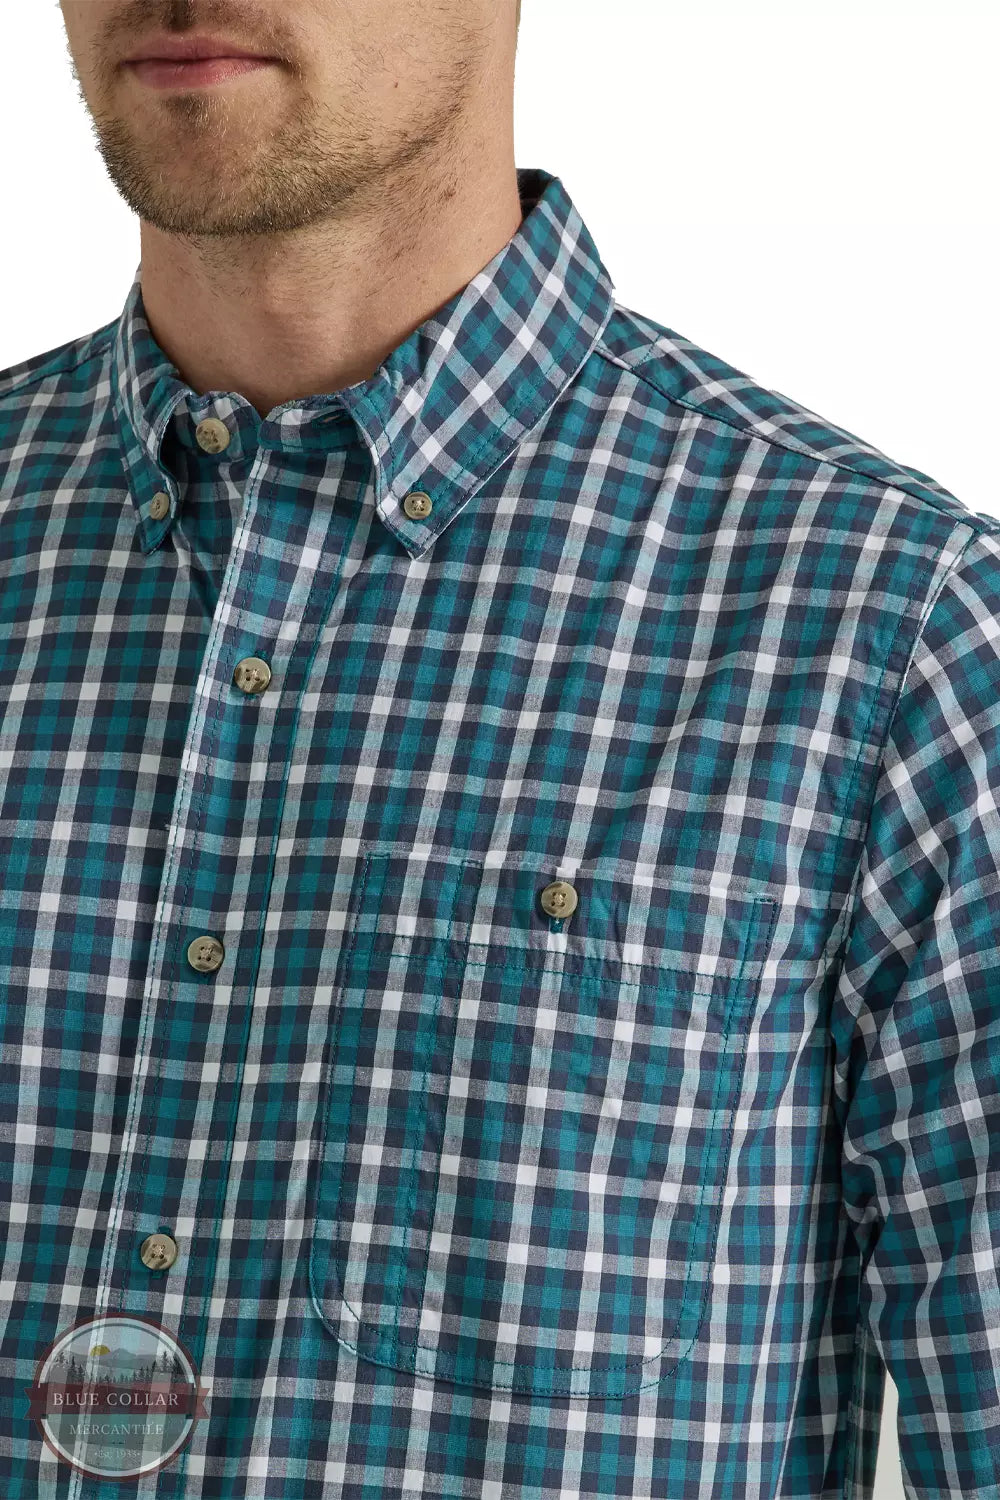 Wrangler 112330359 Rugged Wear Wrinkle Resist Button Down Shirt in Teal Navy Detail View